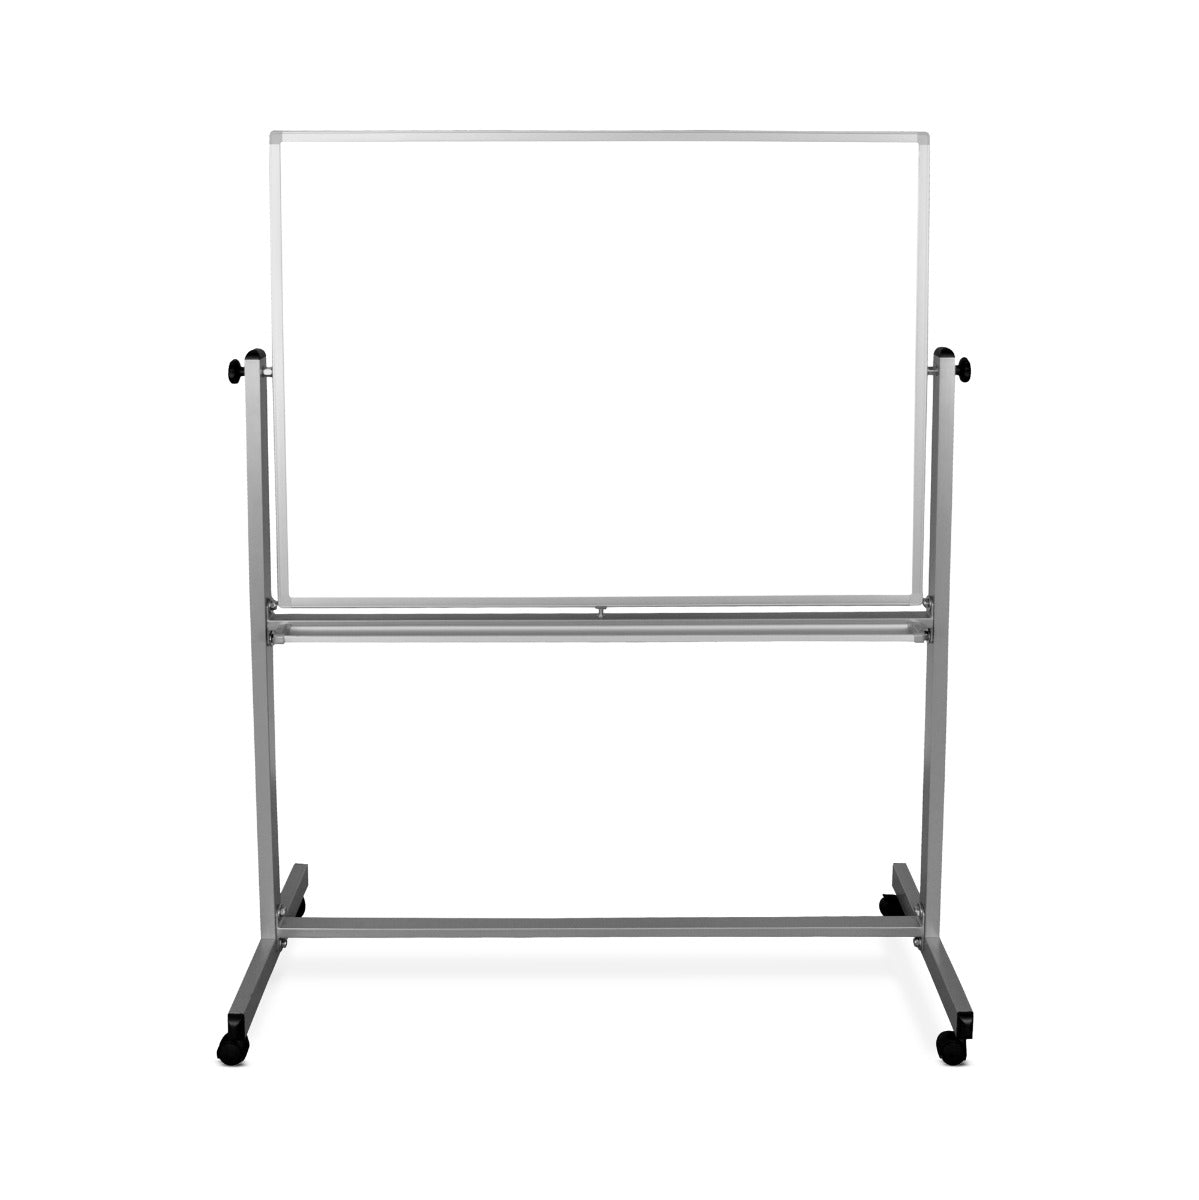 48"W x 36"H Mobile Whiteboard - Double-sided Magnetic dry erase markerboard - Luxor MB4836WW - SchoolOutlet